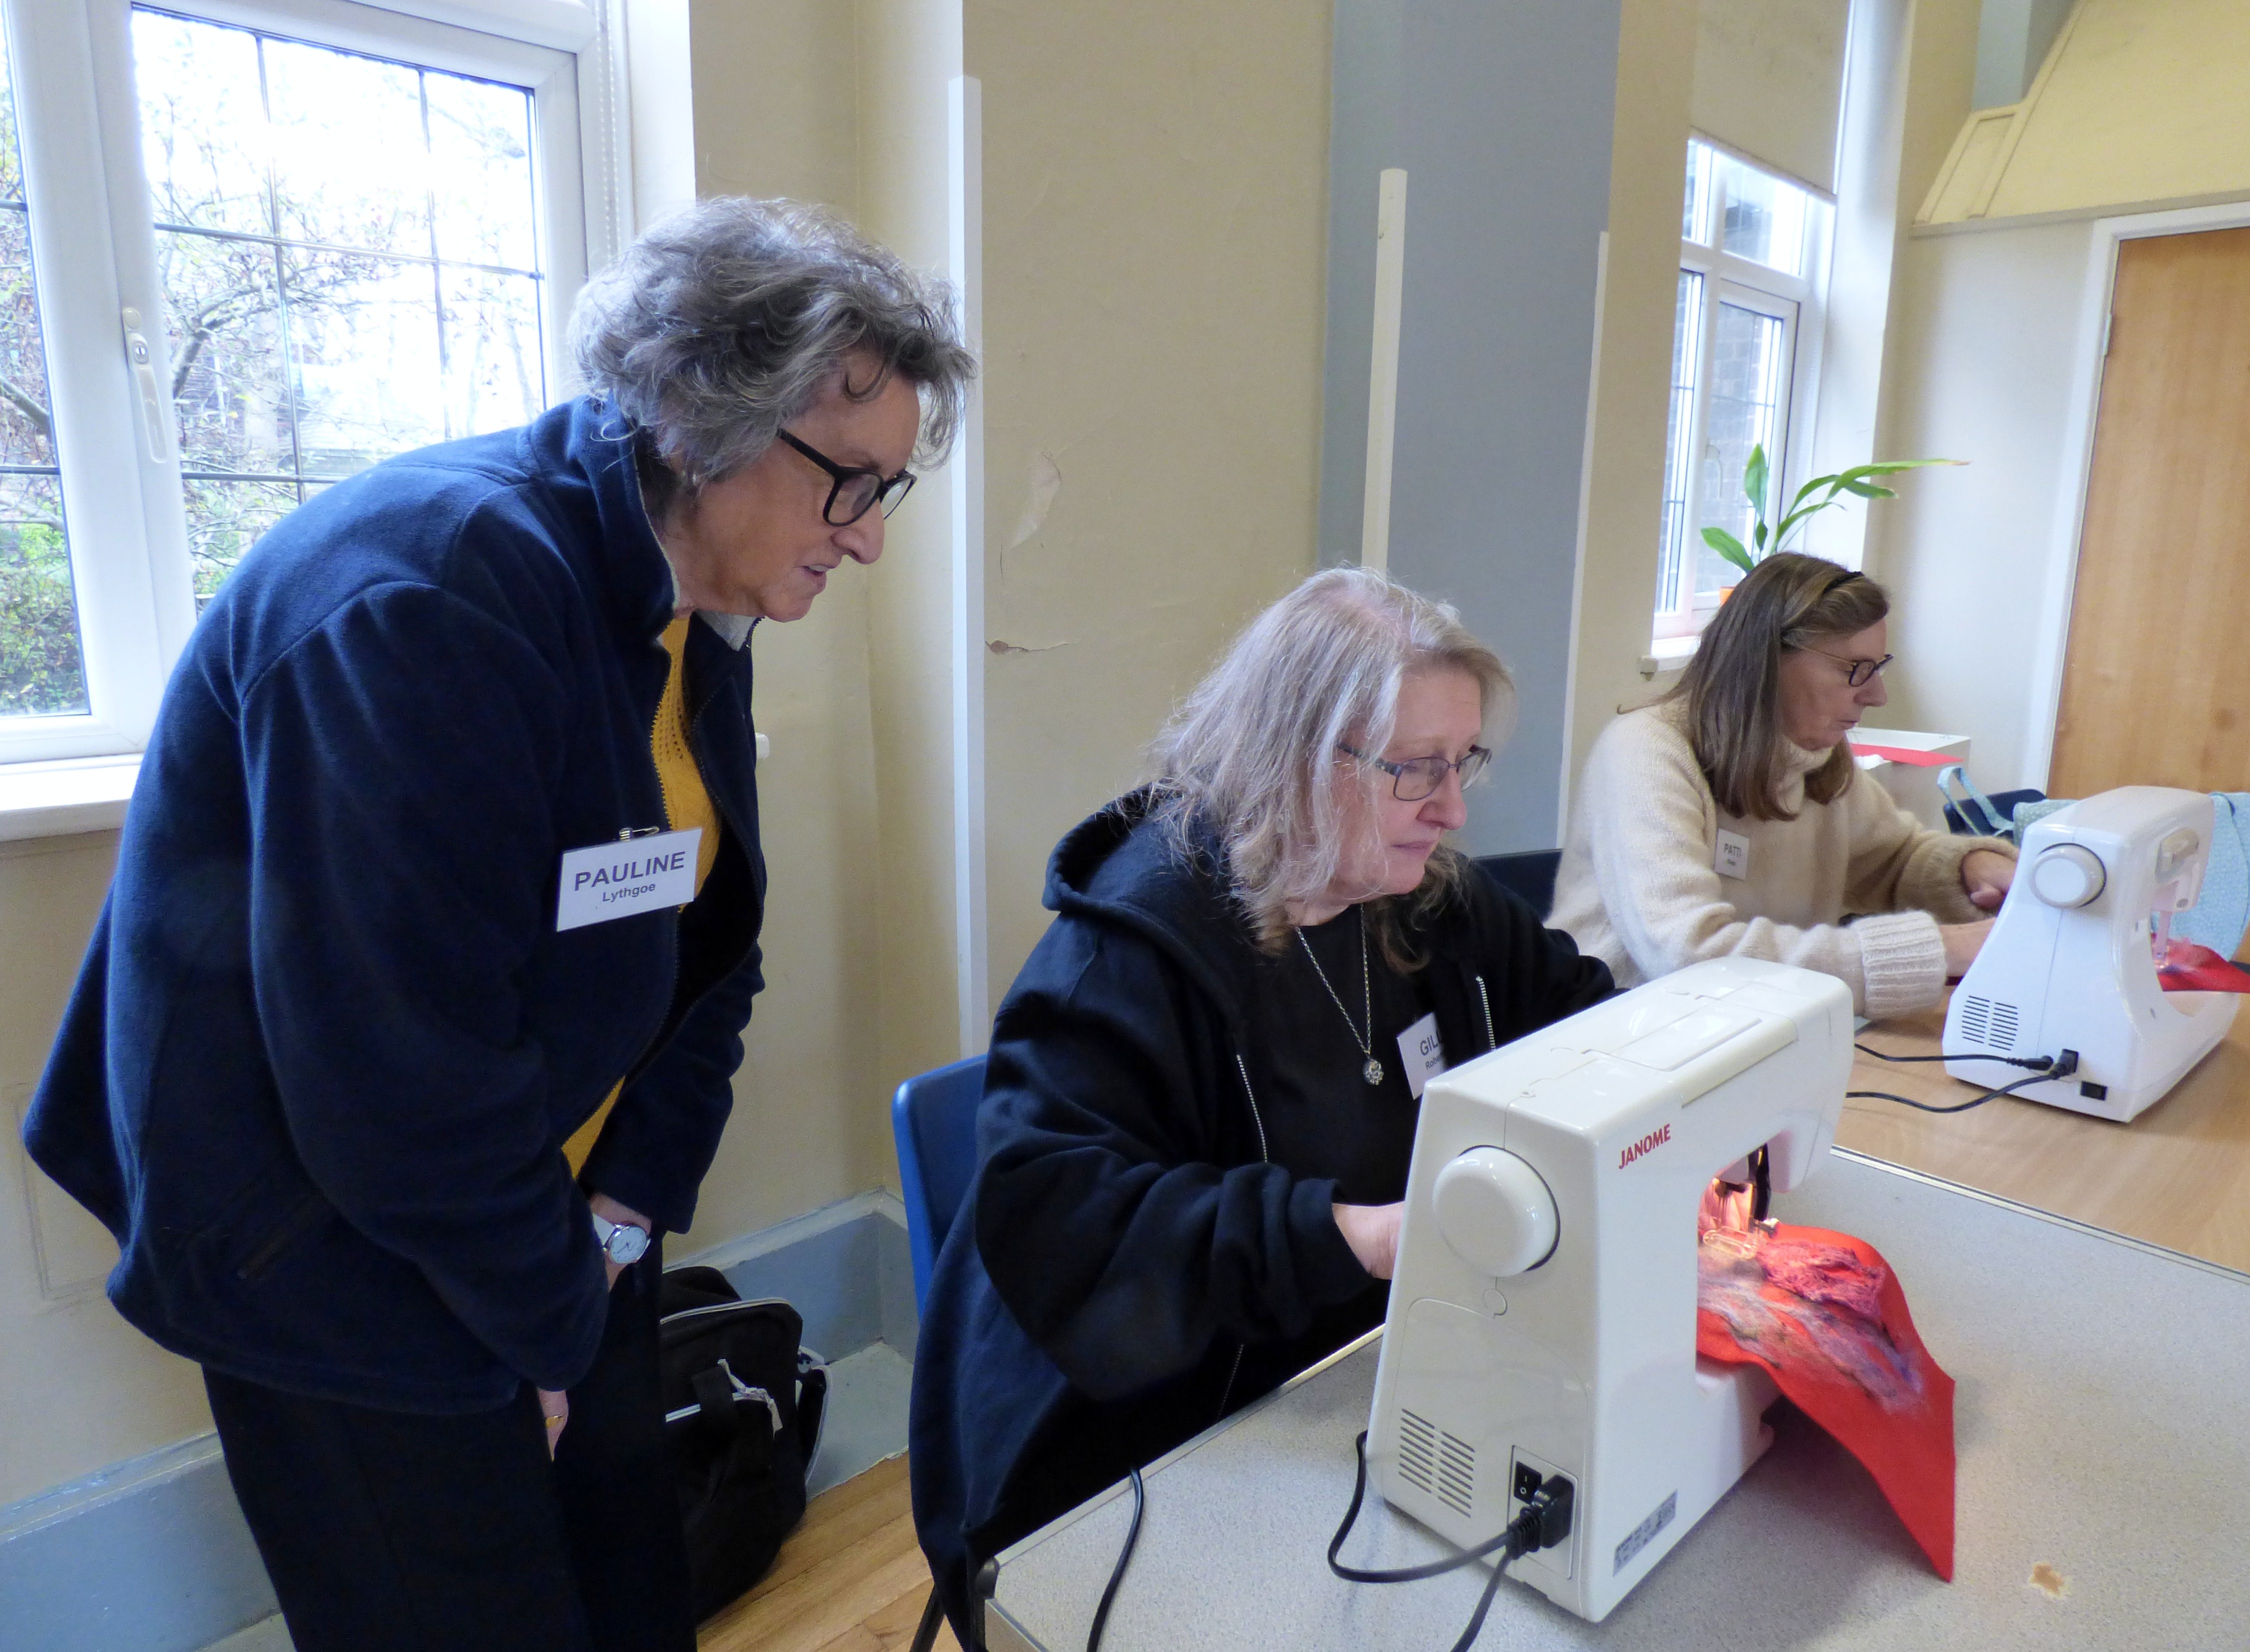 Gill Roberts demonstrating the embellishing machine at Layers, Texturing and Stitch workshop by Gill Roberts 2022